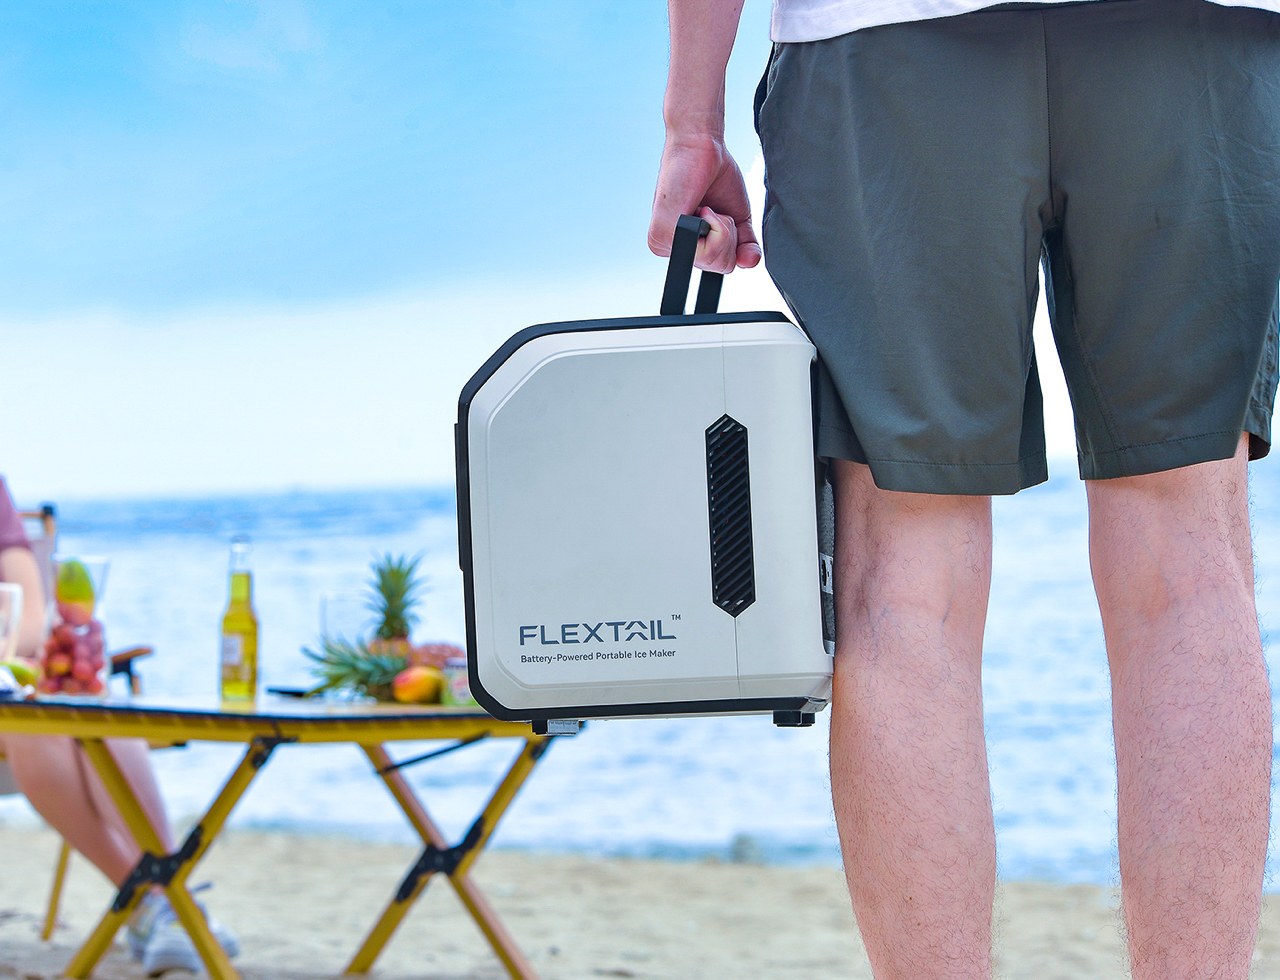 This battery-powered ice maker lets you beat the summer heat anytime, anywhere